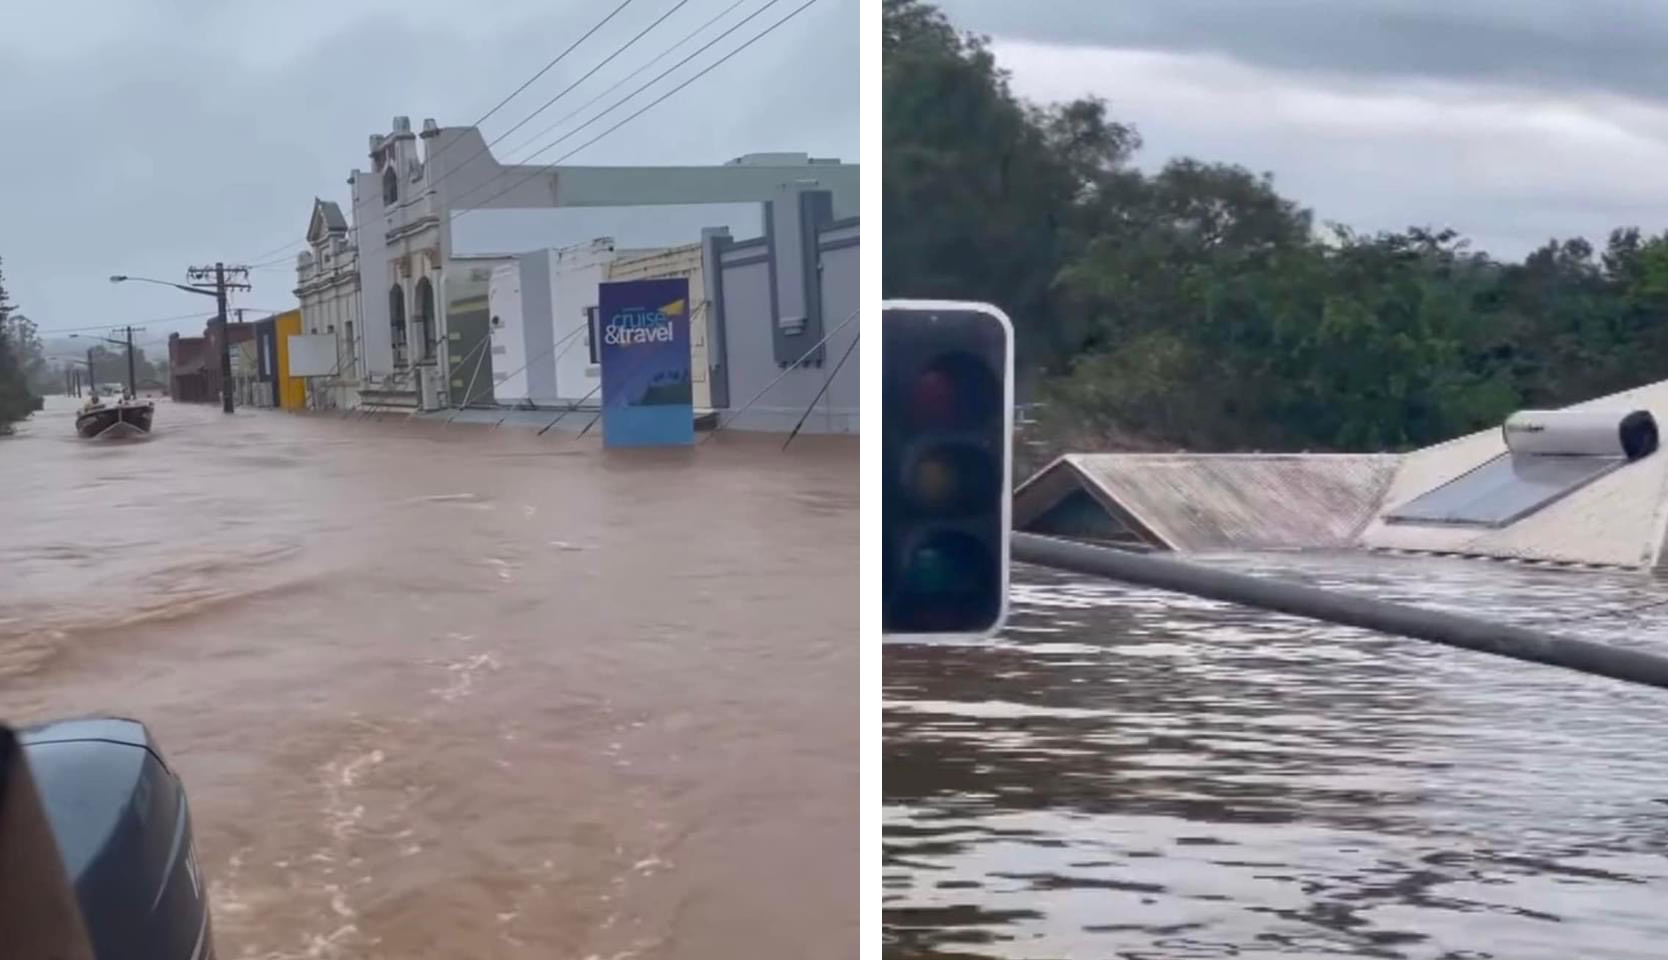 2 Images of the floods in the Northern Rivers. The image on the left shows flood water up to the second stories of businesses with boats driving through the street. The image on the right shows flood water over the rood of a house.